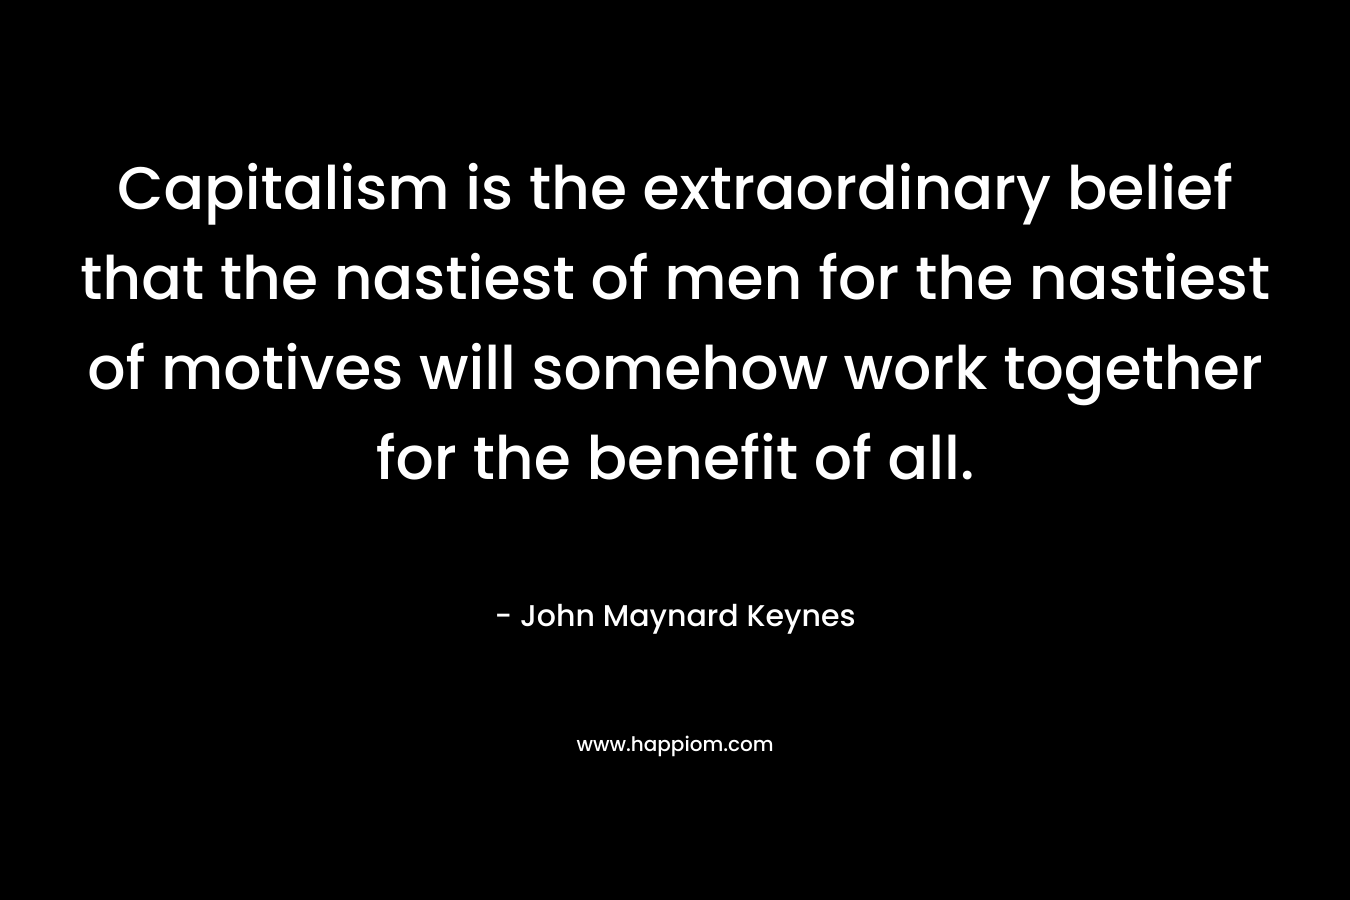 Capitalism is the extraordinary belief that the nastiest of men for the nastiest of motives will somehow work together for the benefit of all. – John Maynard Keynes